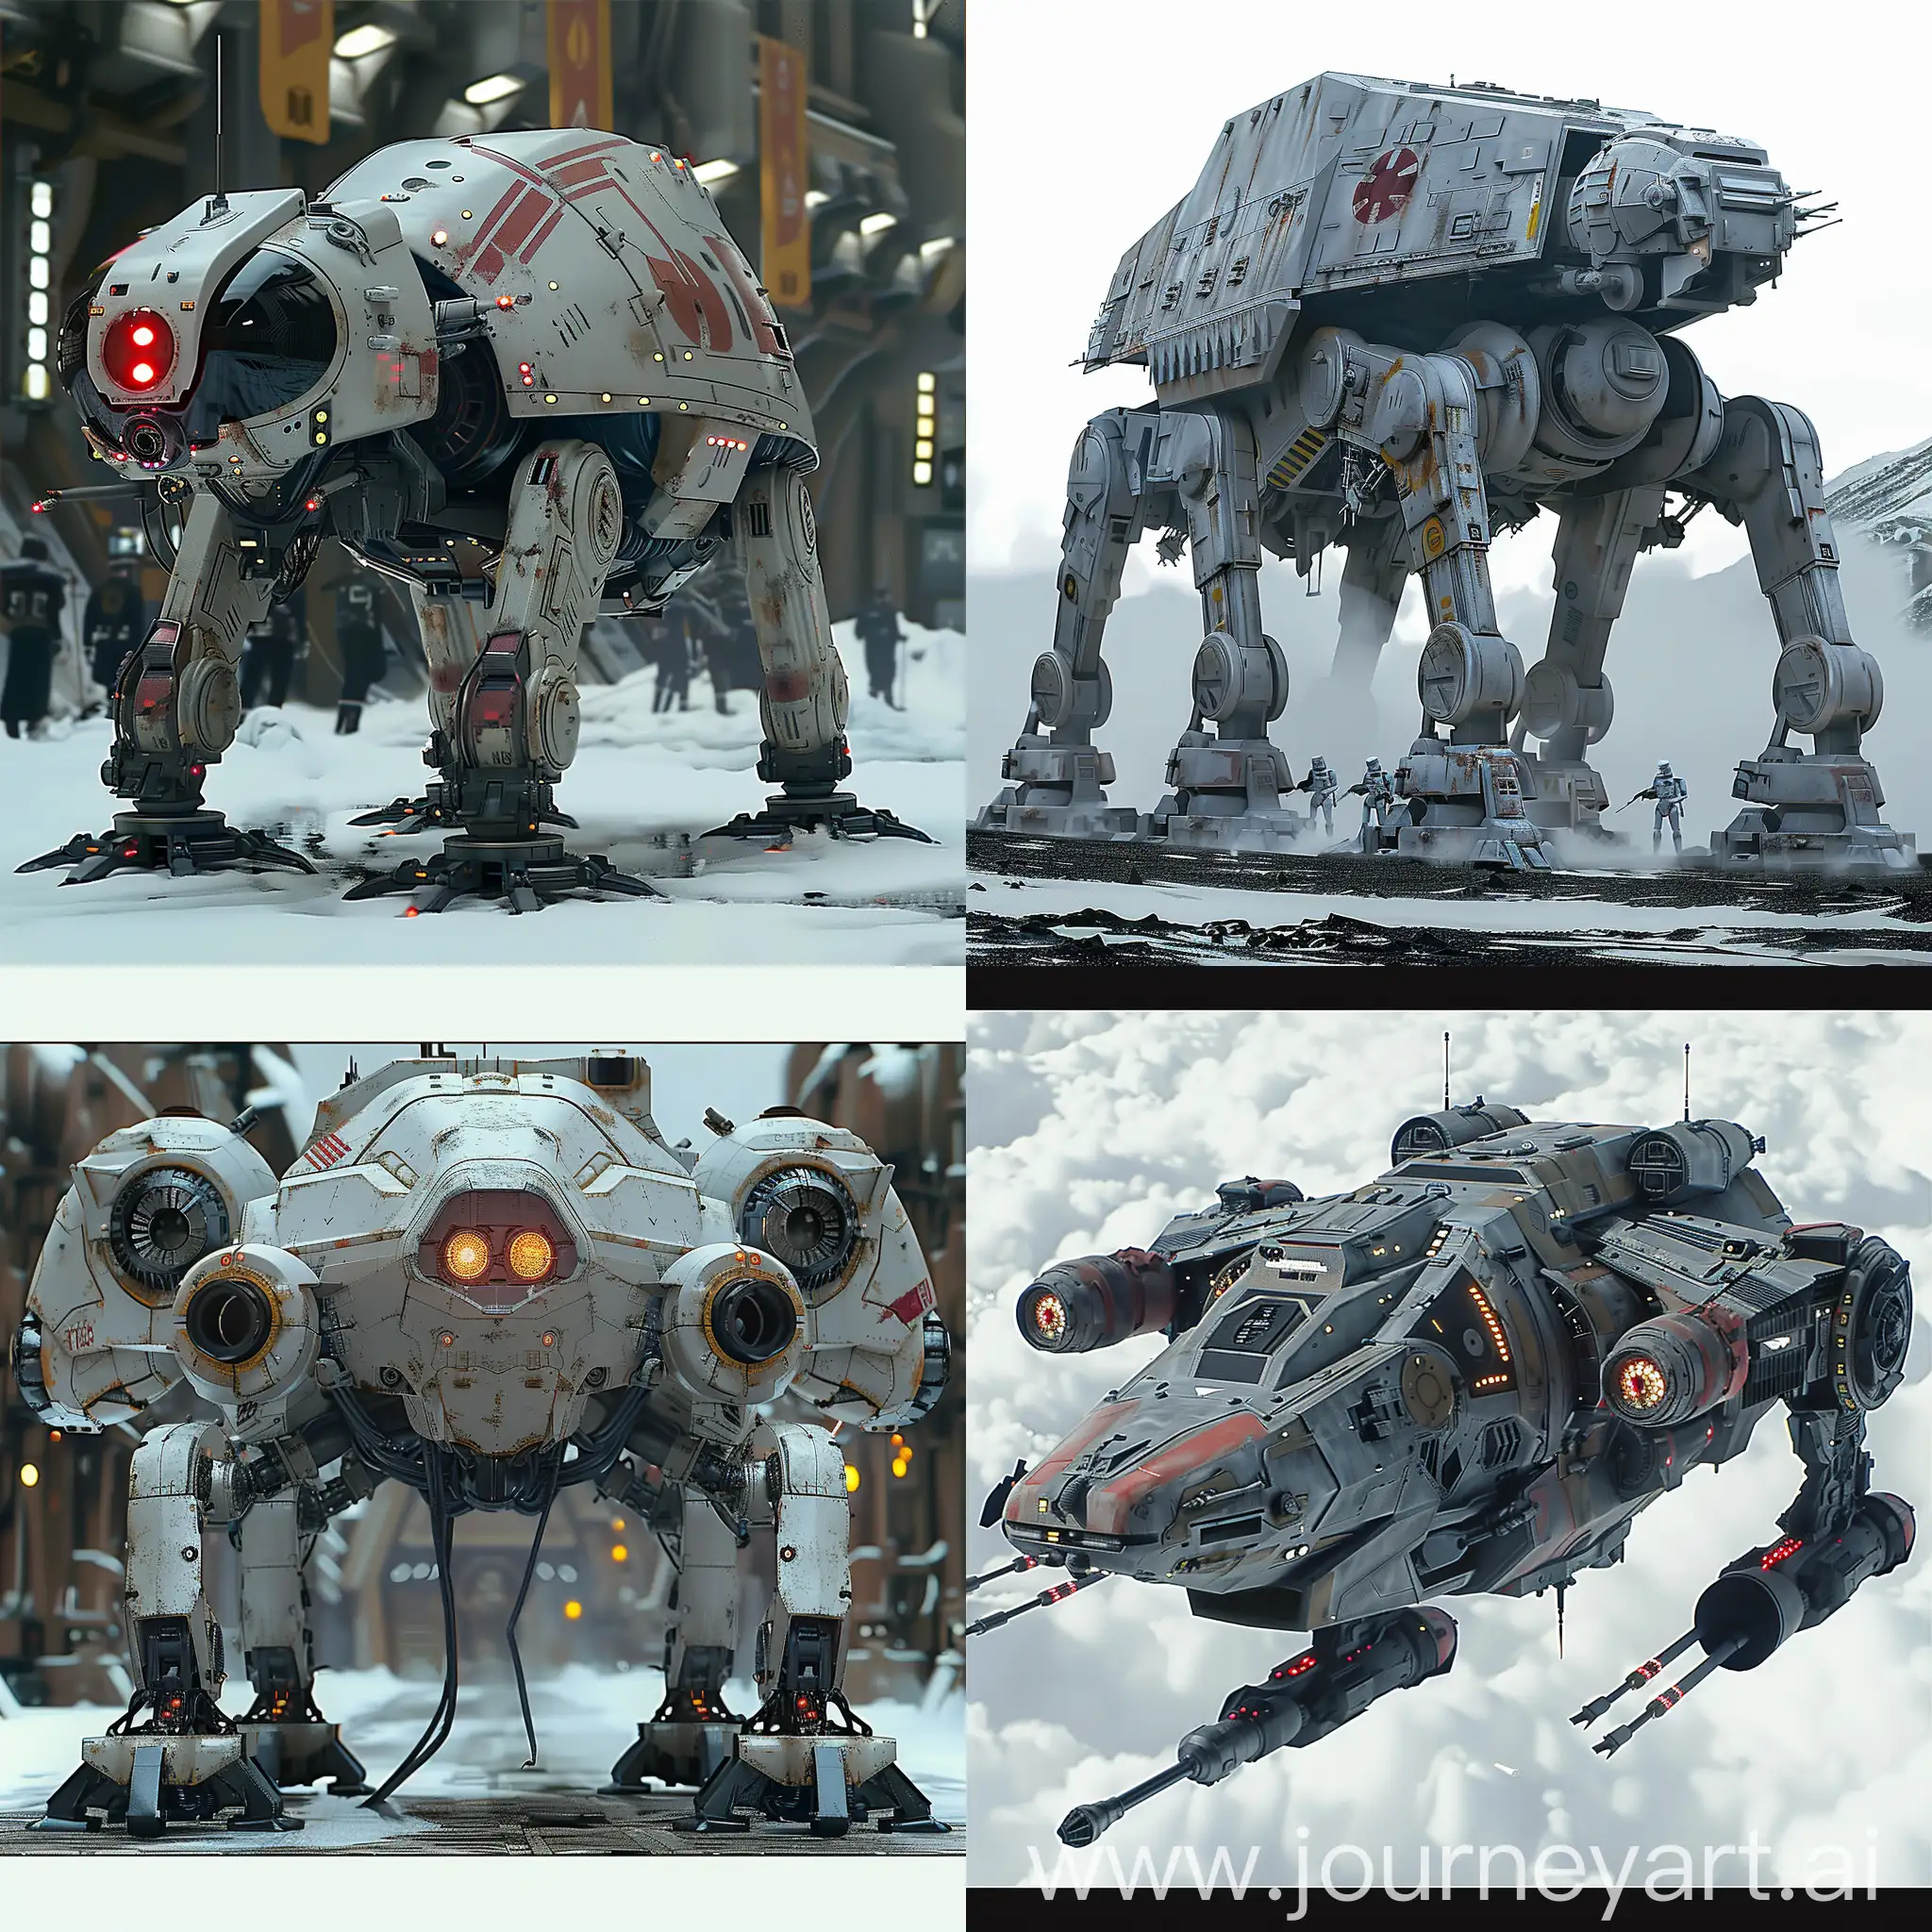 Futuristic:: Star Wars All Terrain Tactical Enforcer https://static.wikia.nocookie.net/starwars/images/4/4f/ATTE-SWBoL.png/revision/latest?cb=20240130044527, Advanced AI Navigation System, Energy Shielding Technology, Cloaking Device, Hyperspace Capabilities, Laser Cannons, Drone Swarms, Adaptive Armor, Gravity Manipulation Technology, Targeting System, Self-repairing Nanobots, Self-repairing Nanobots, Nanoscale Sensors, Nanoscale Weaponry, Nanoscale Armor, Nanoscale Cloaking Technology, Nanoscale Communication Systems, Nanoscale Energy Storage, Nanoscale Medical Nanobots, Nanoscale Environmental Control, Nanoscale Morphing Technology, octane render --stylize 1000